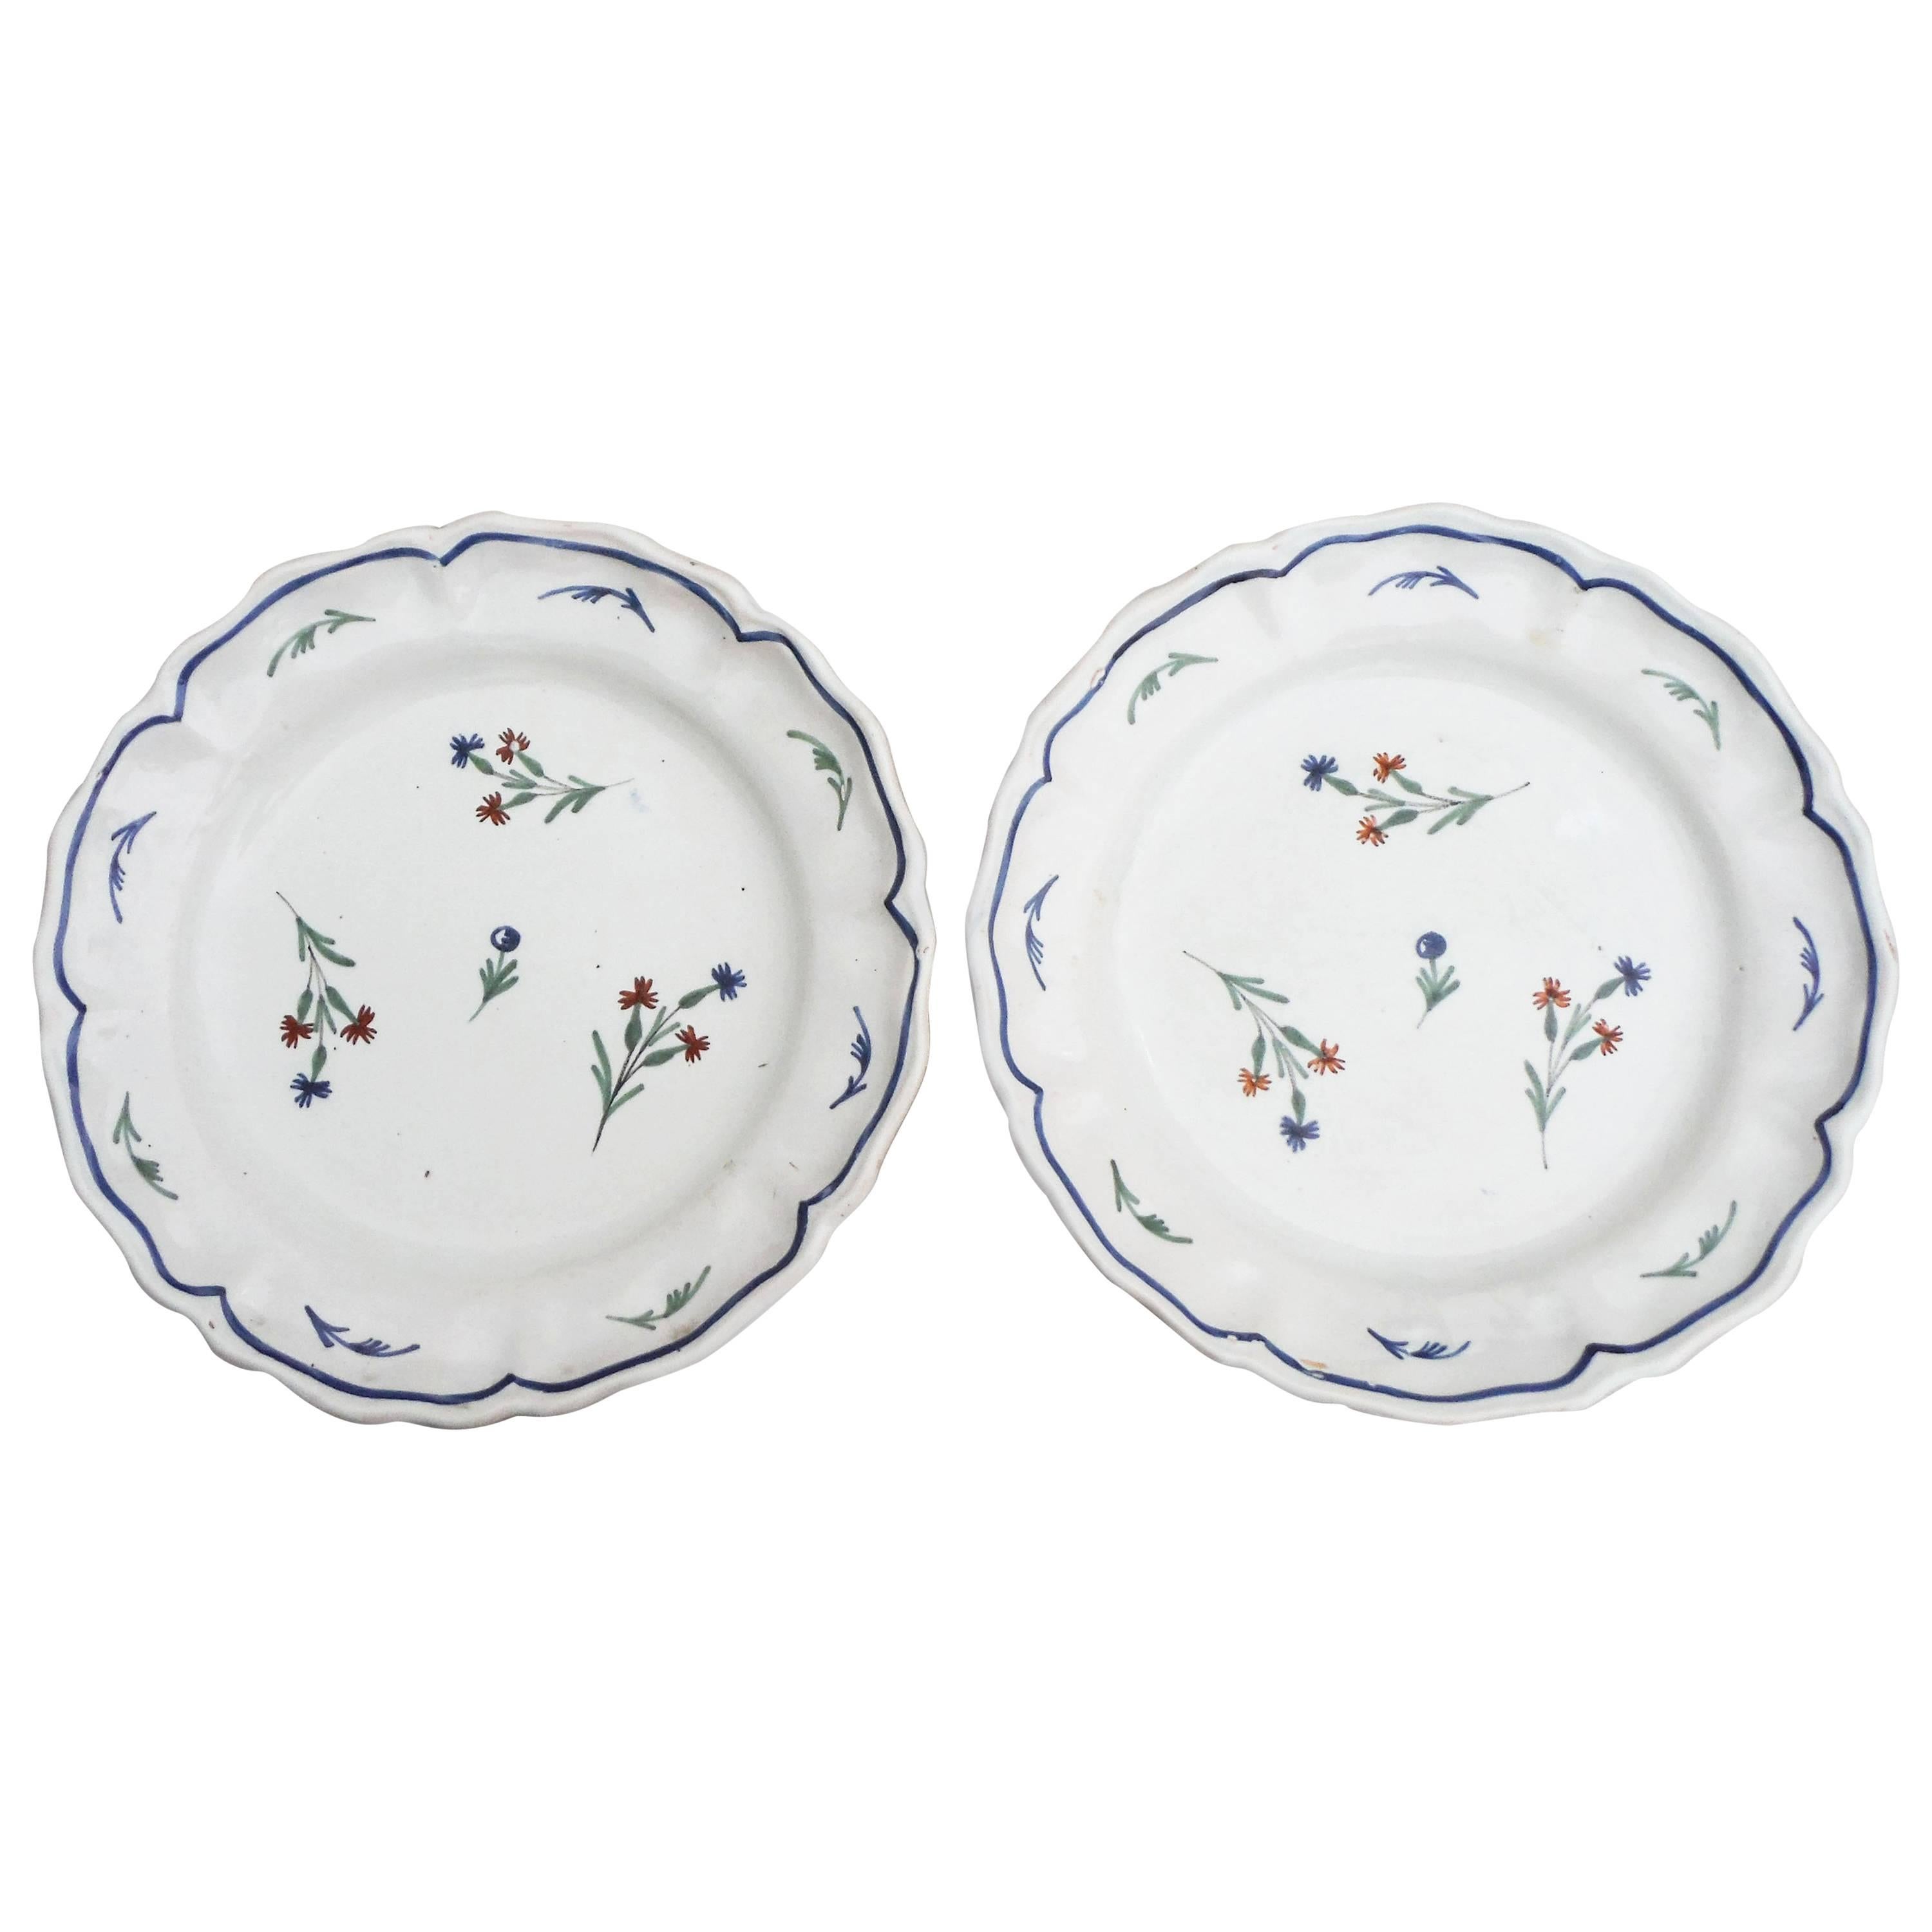 Pair of 19th French Faience Plates Decorated with Flowers